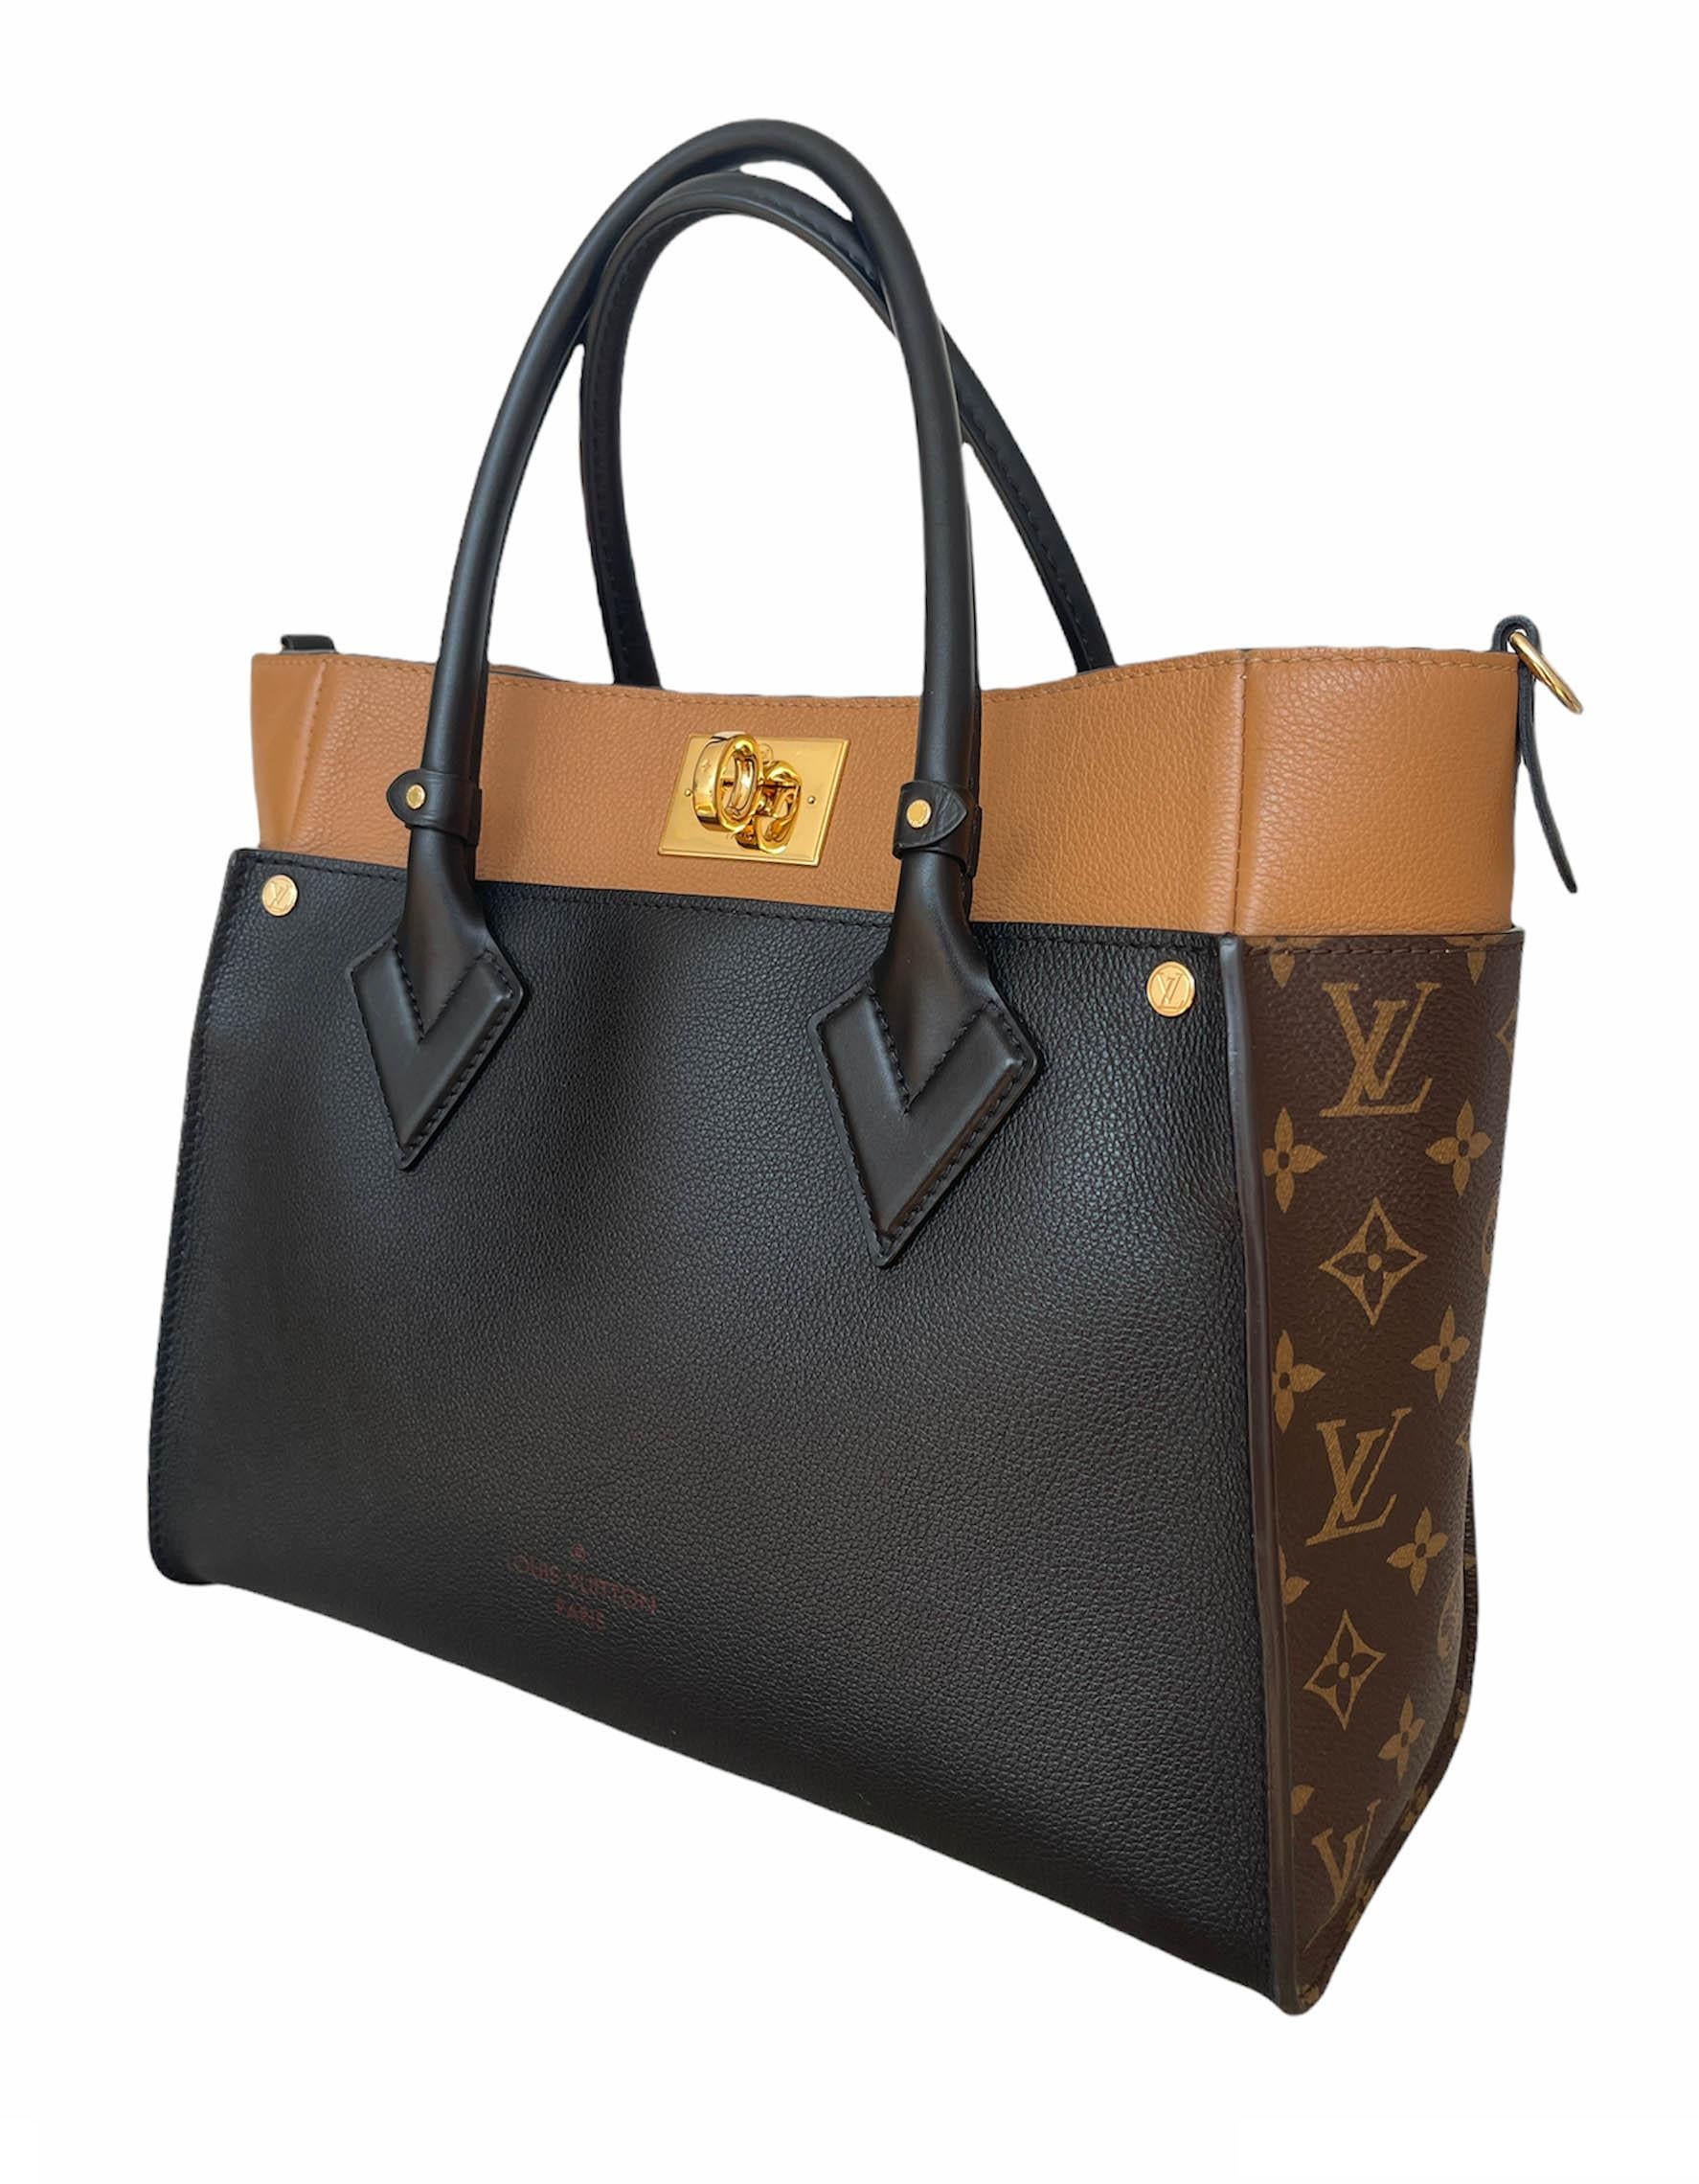 Louis Vuitton Black Calfskin & Monogram On My Side Tote Bag

Made In: France
Year of Production: 2019
Color: Black, brown, tan
Hardware: Goldtone
Materials: Calfskin leather, coated canvas
Lining: Alcantara suede-like microfiber
Closure/Opening: